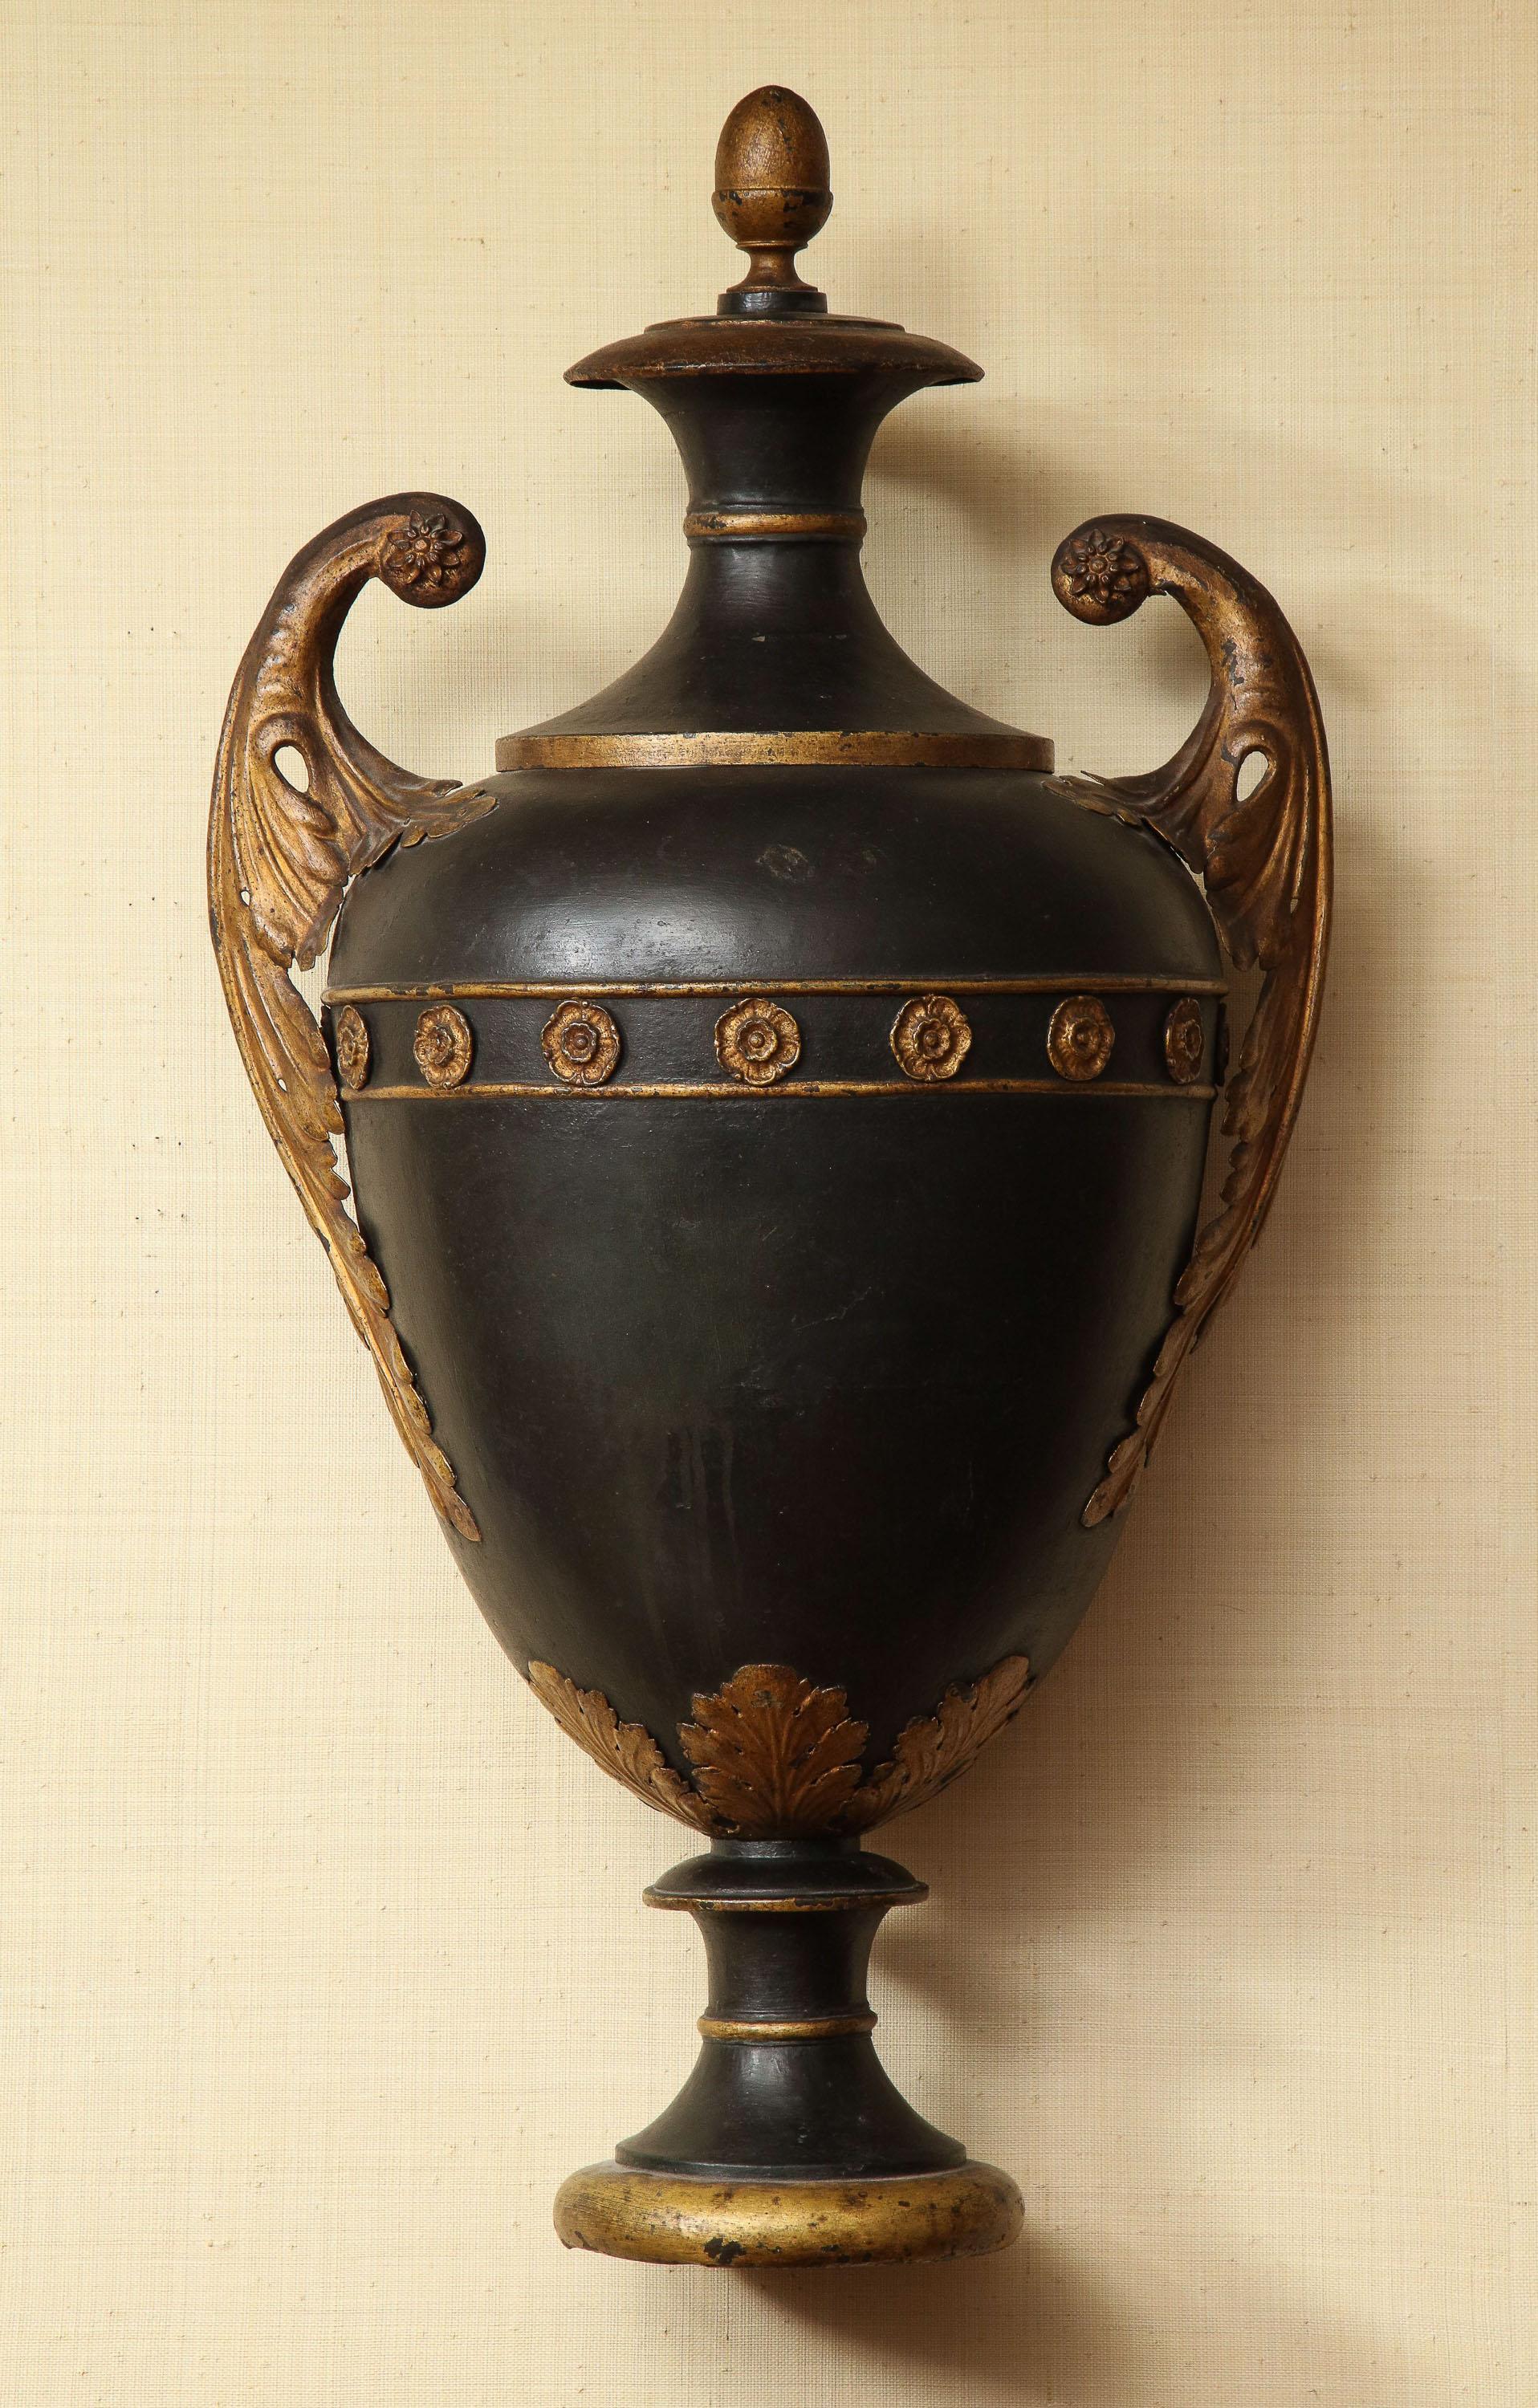 19th century French, wall hanging urn in tole.